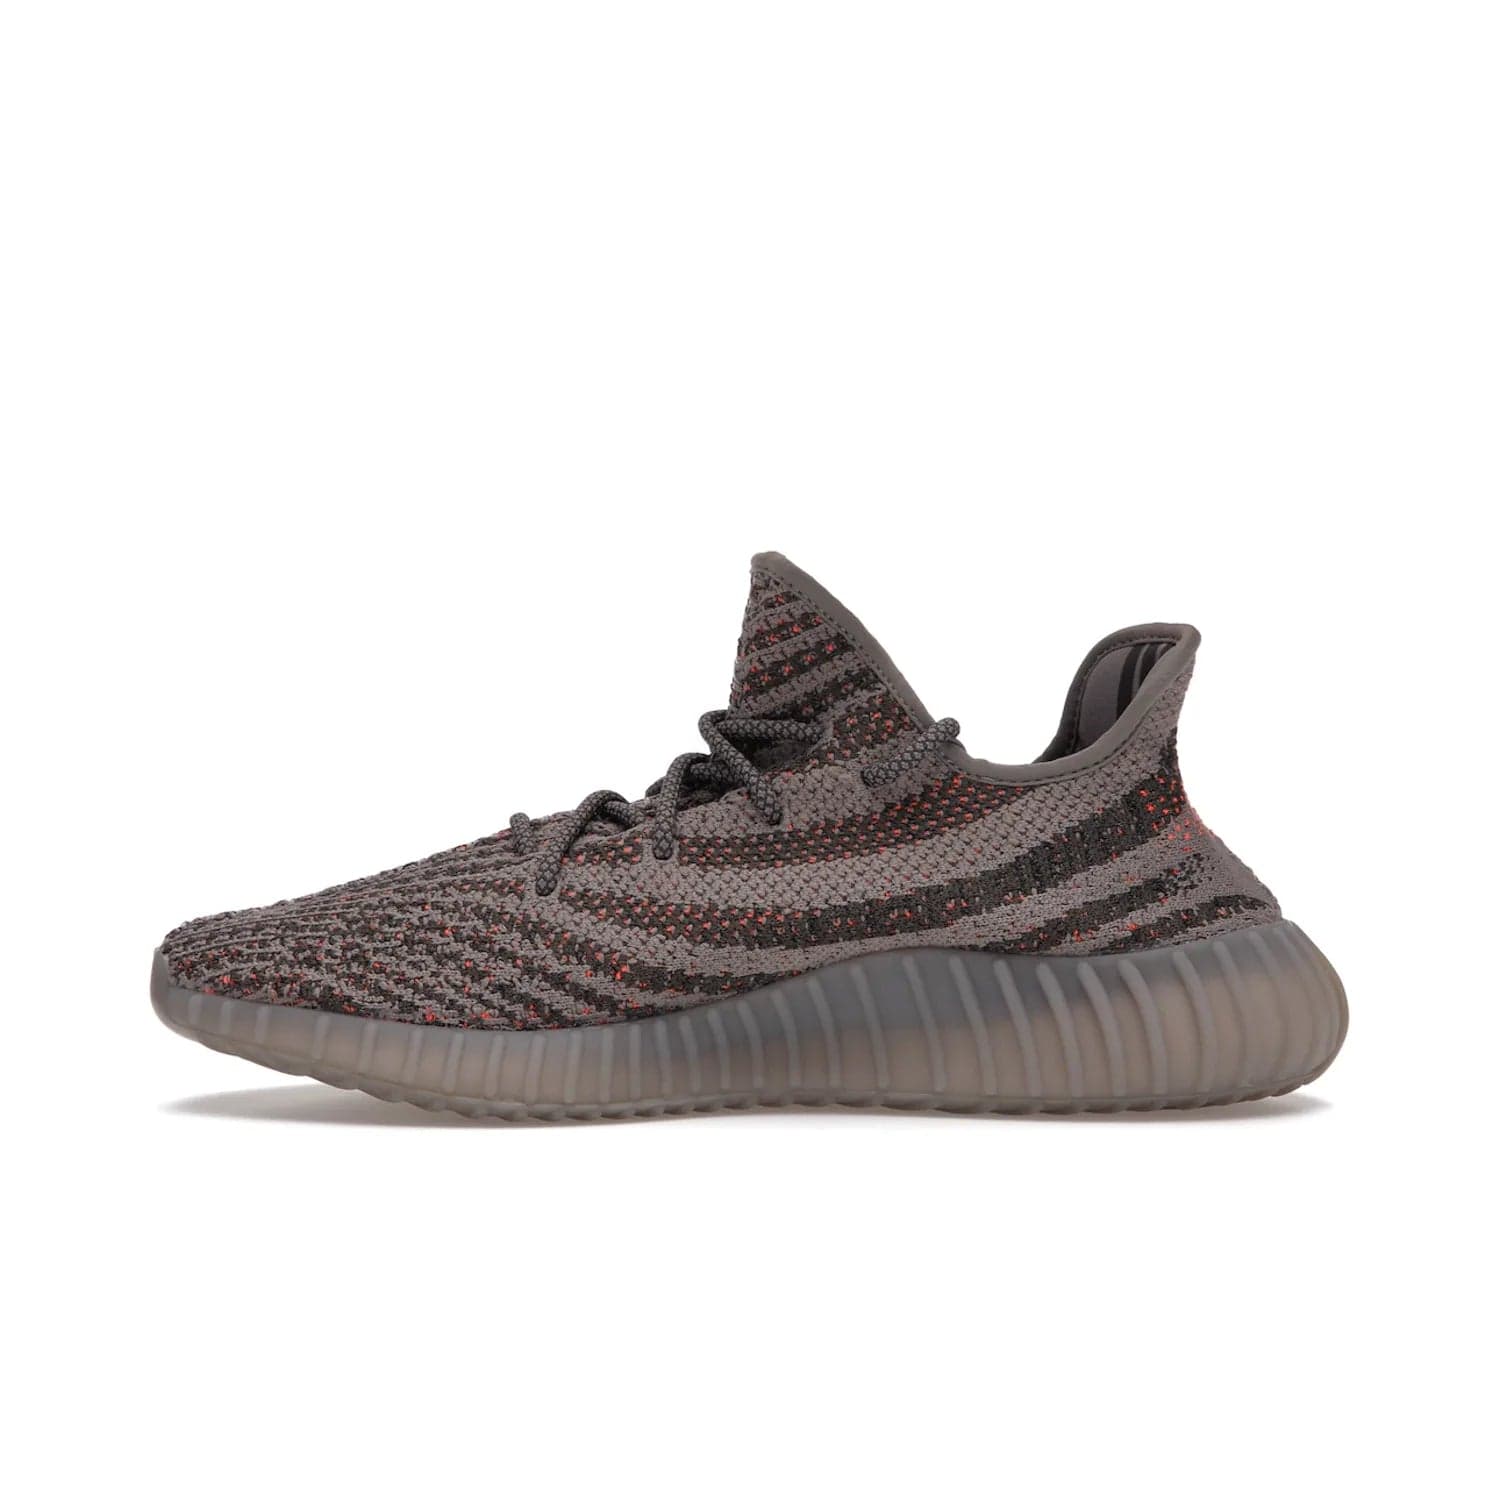 adidas Yeezy Boost 350 V2 Beluga Reflective - Image 19 - Only at www.BallersClubKickz.com - Shop the adidas Yeezy Boost 350 V2 Beluga Reflective: a stylish, reflective sneaker that stands out. Featuring Boost sole, Primeknit upper & signature orange stripe. Available Dec 2021.